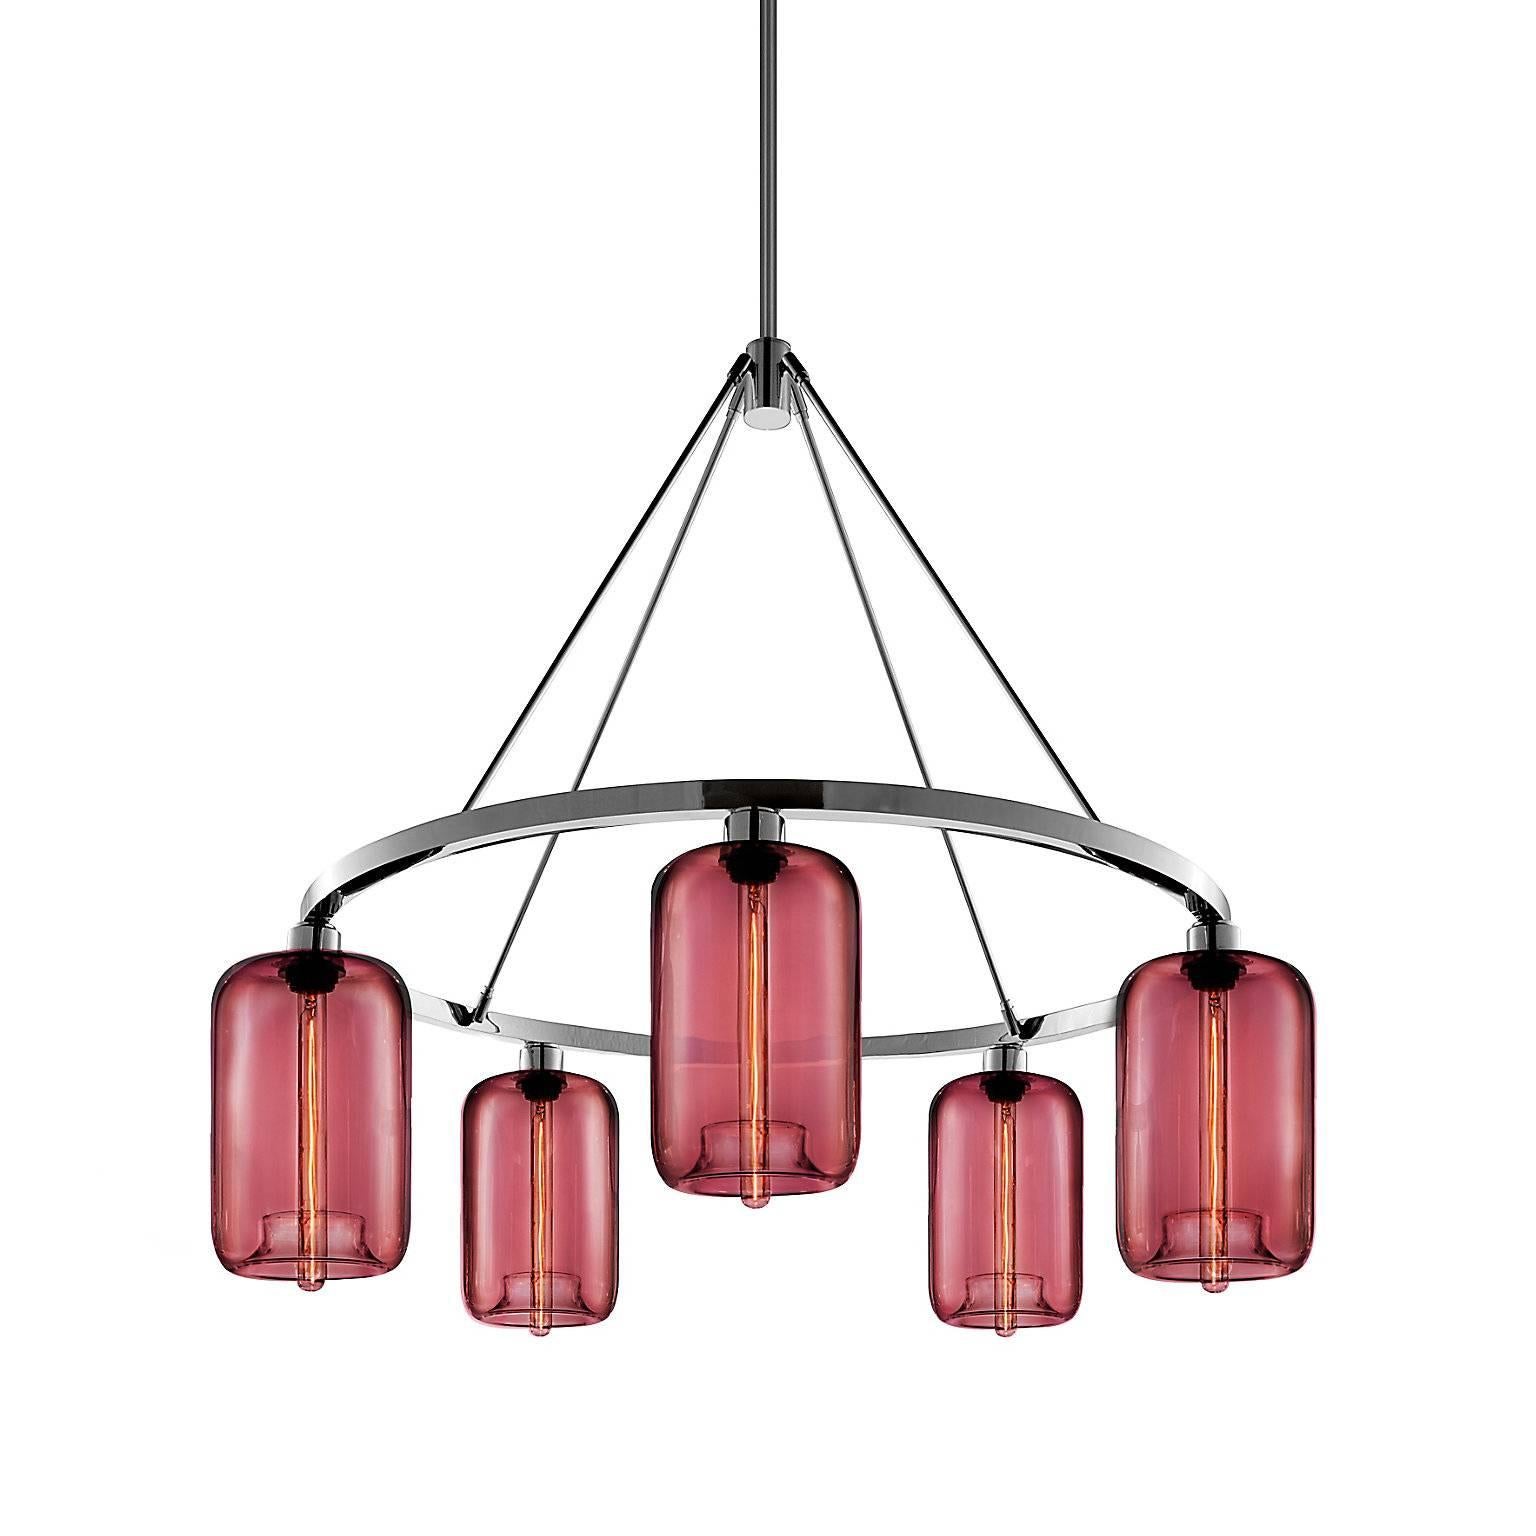 Pod Crystal Handblown Modern Glass Polished Nickel Chandelier Light In New Condition For Sale In Beacon, NY